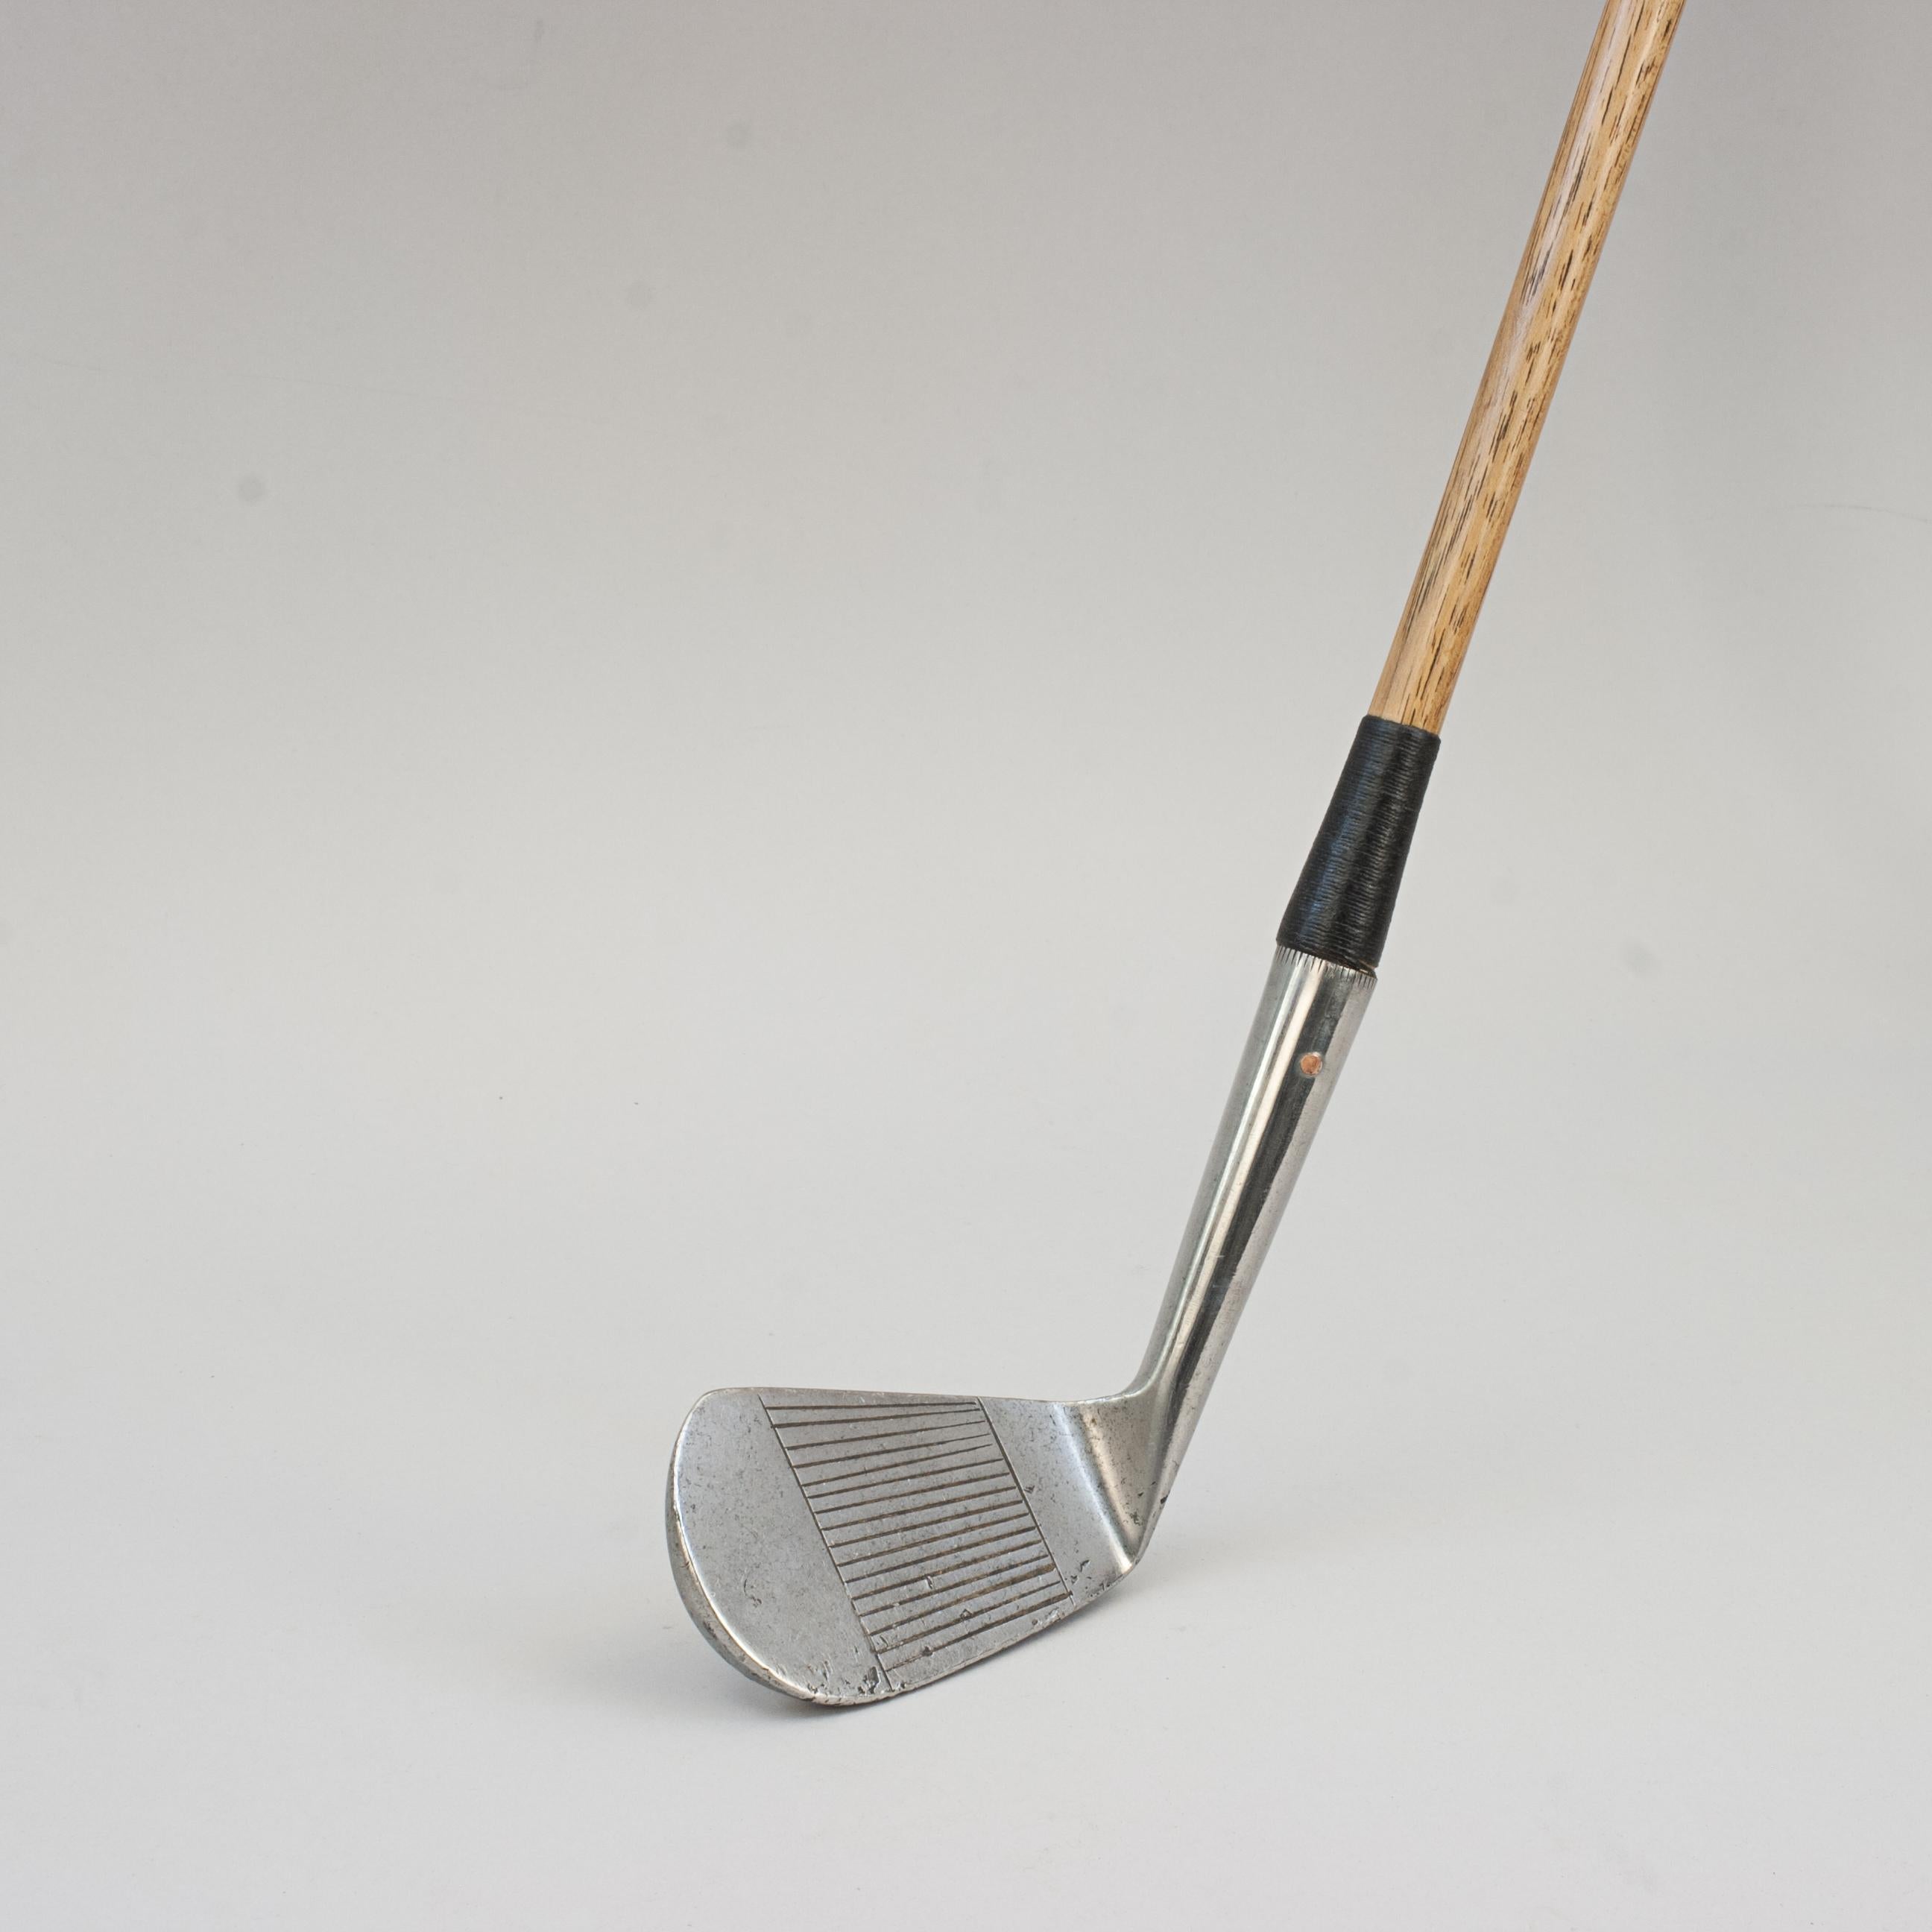 Gamage Mashie, Hickory Golf Club.
A good looking deep faced Mashie retailed by A.W. Gamage Ltd. The hickory shaft with a polished leather grip, the club head is stamped 'Warranted Hand Forged, Made In Scotland, A.W. Gamage Ltd., Special, Rustless,